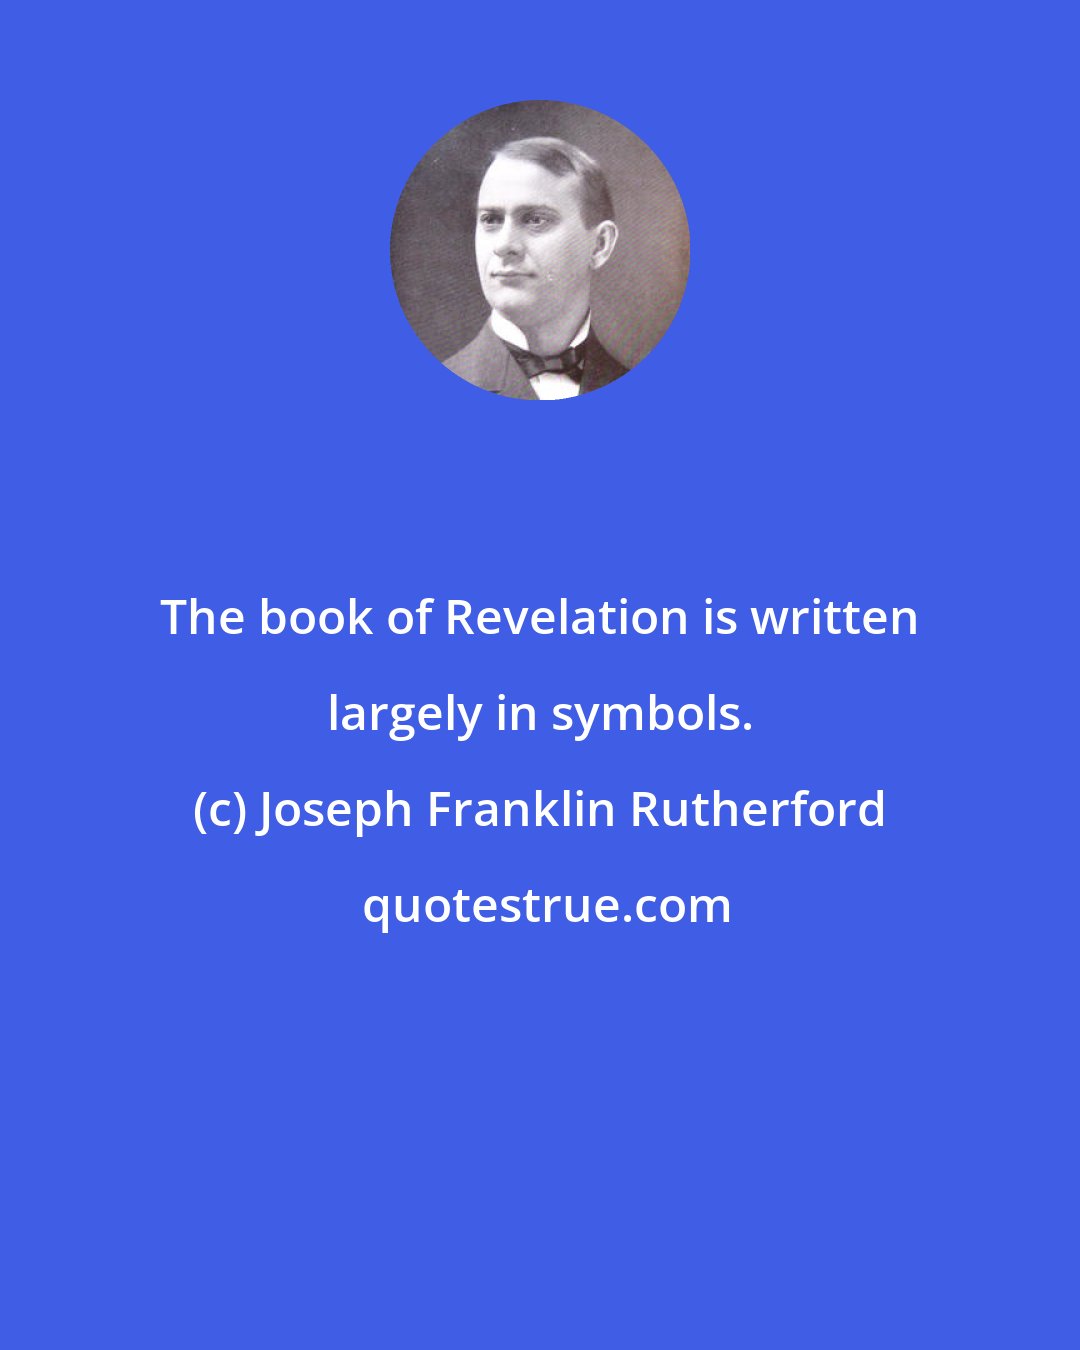 Joseph Franklin Rutherford: The book of Revelation is written largely in symbols.